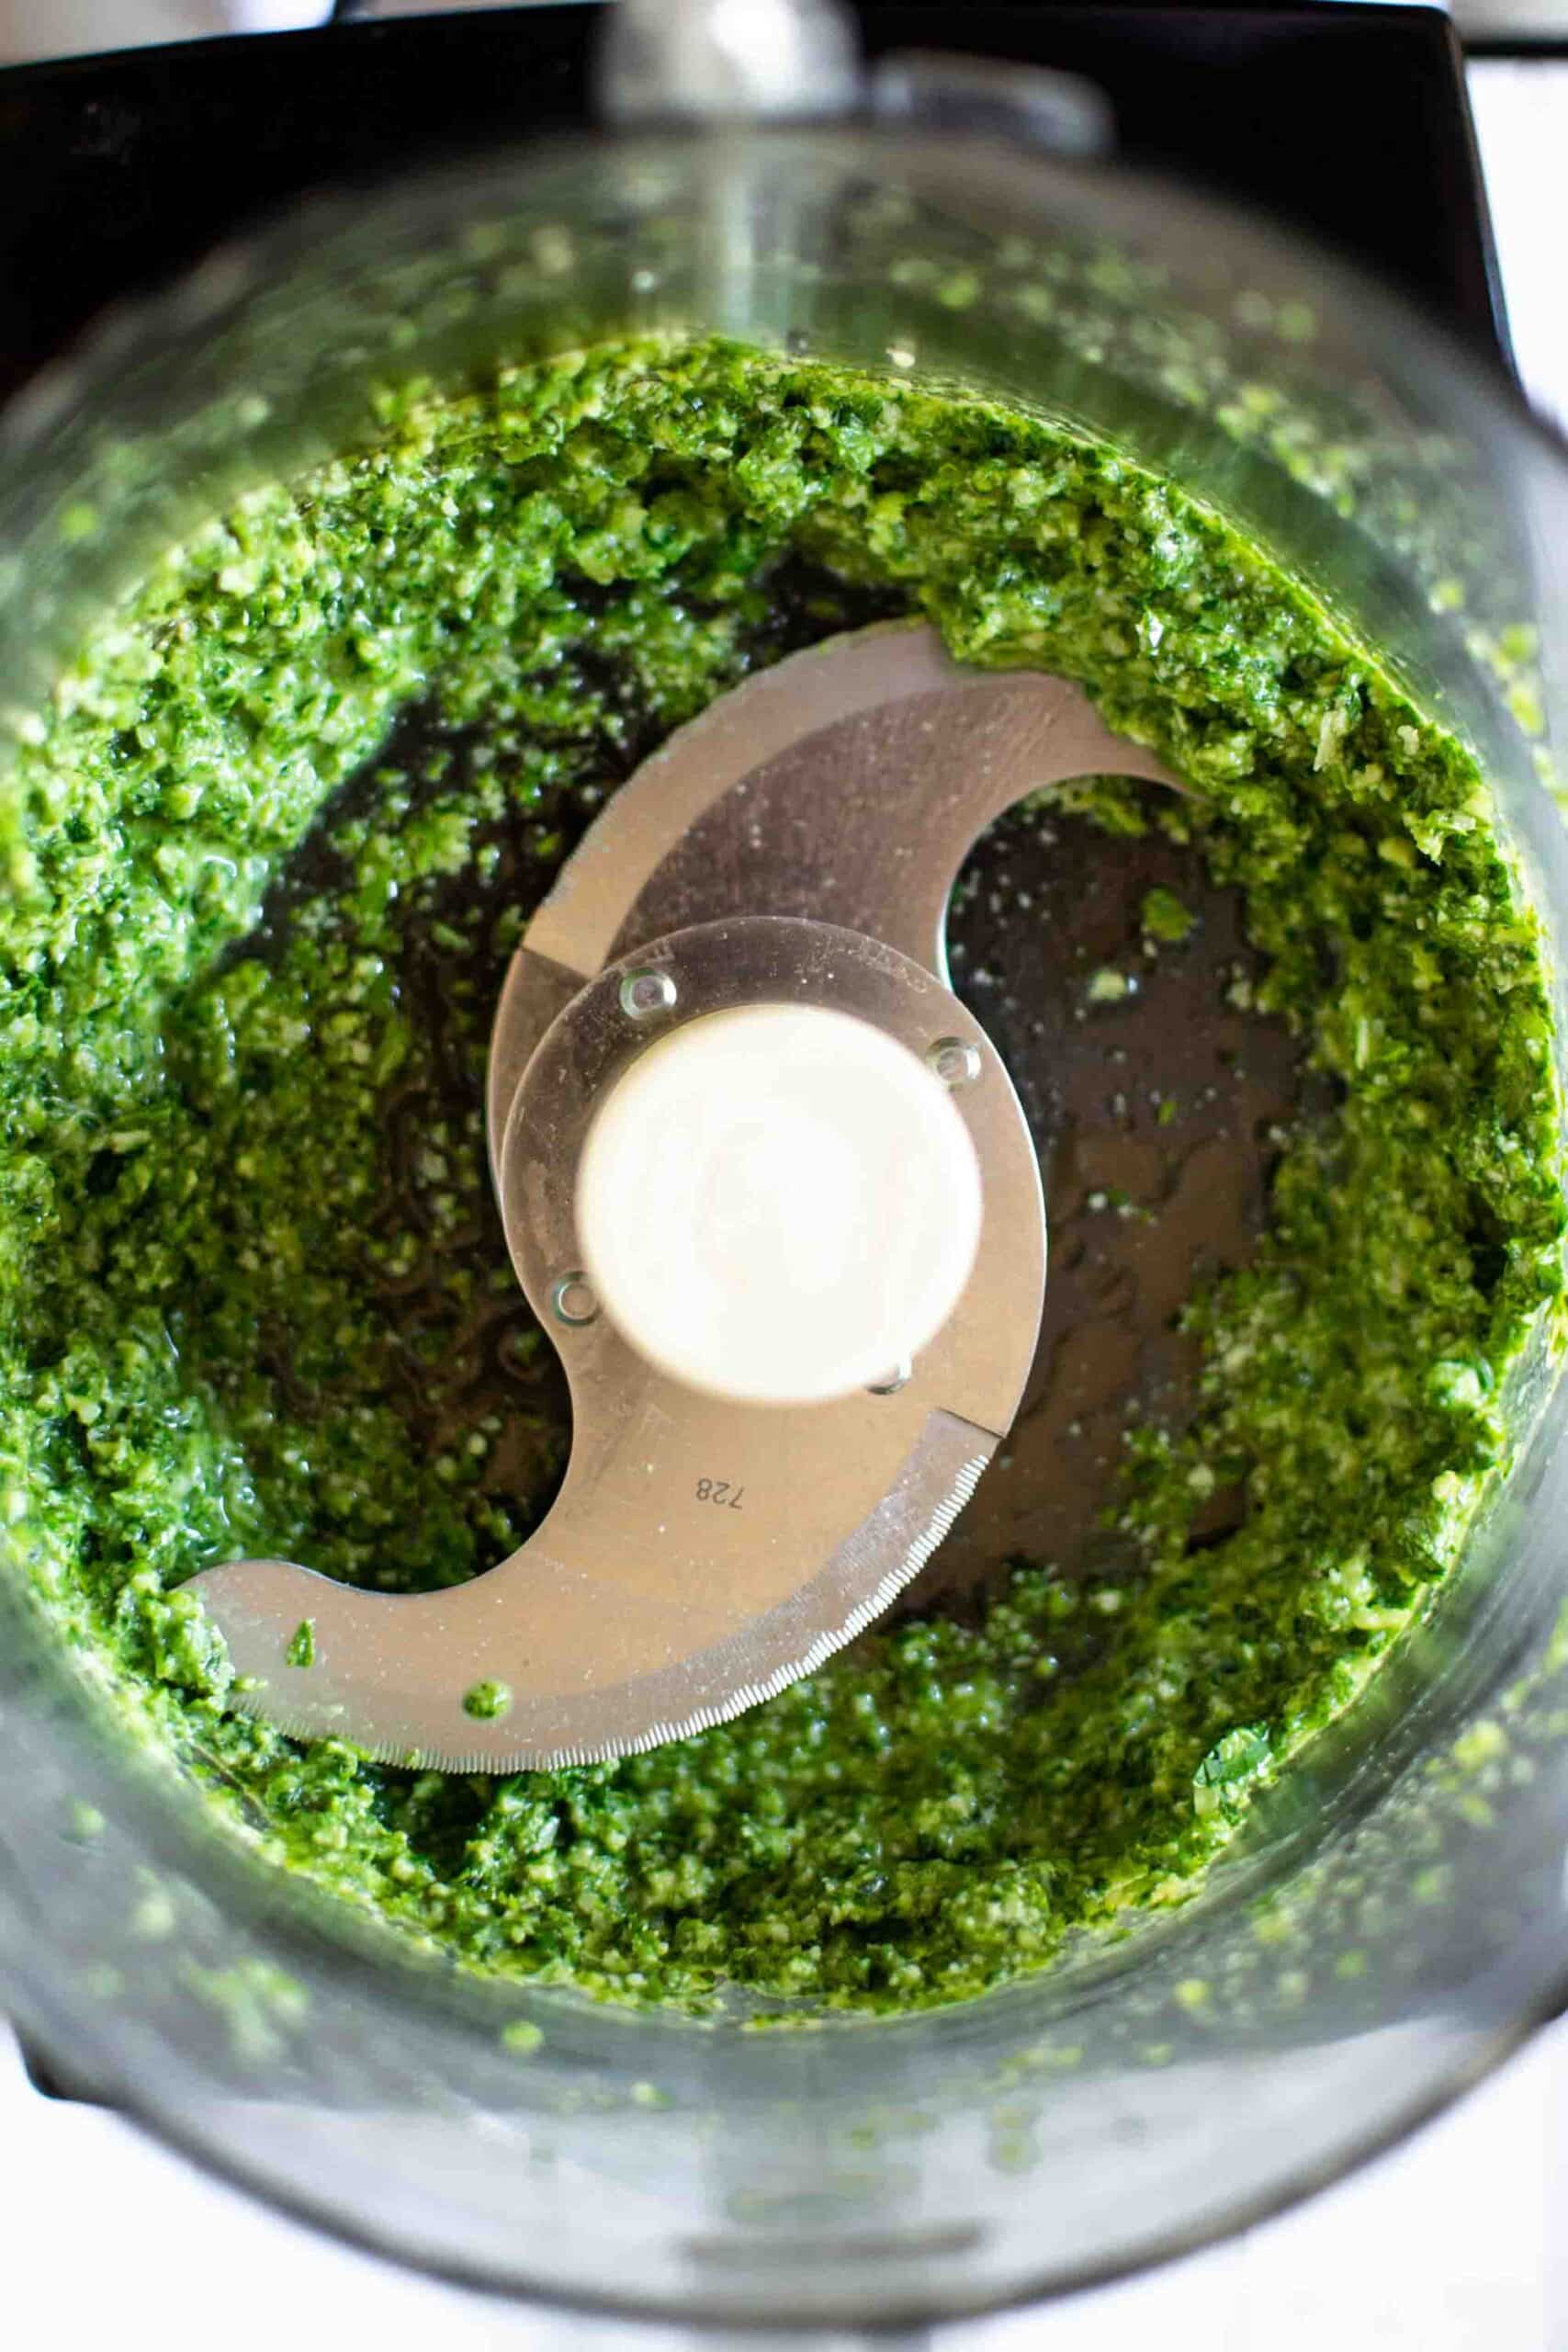 Finished pesto in food processor